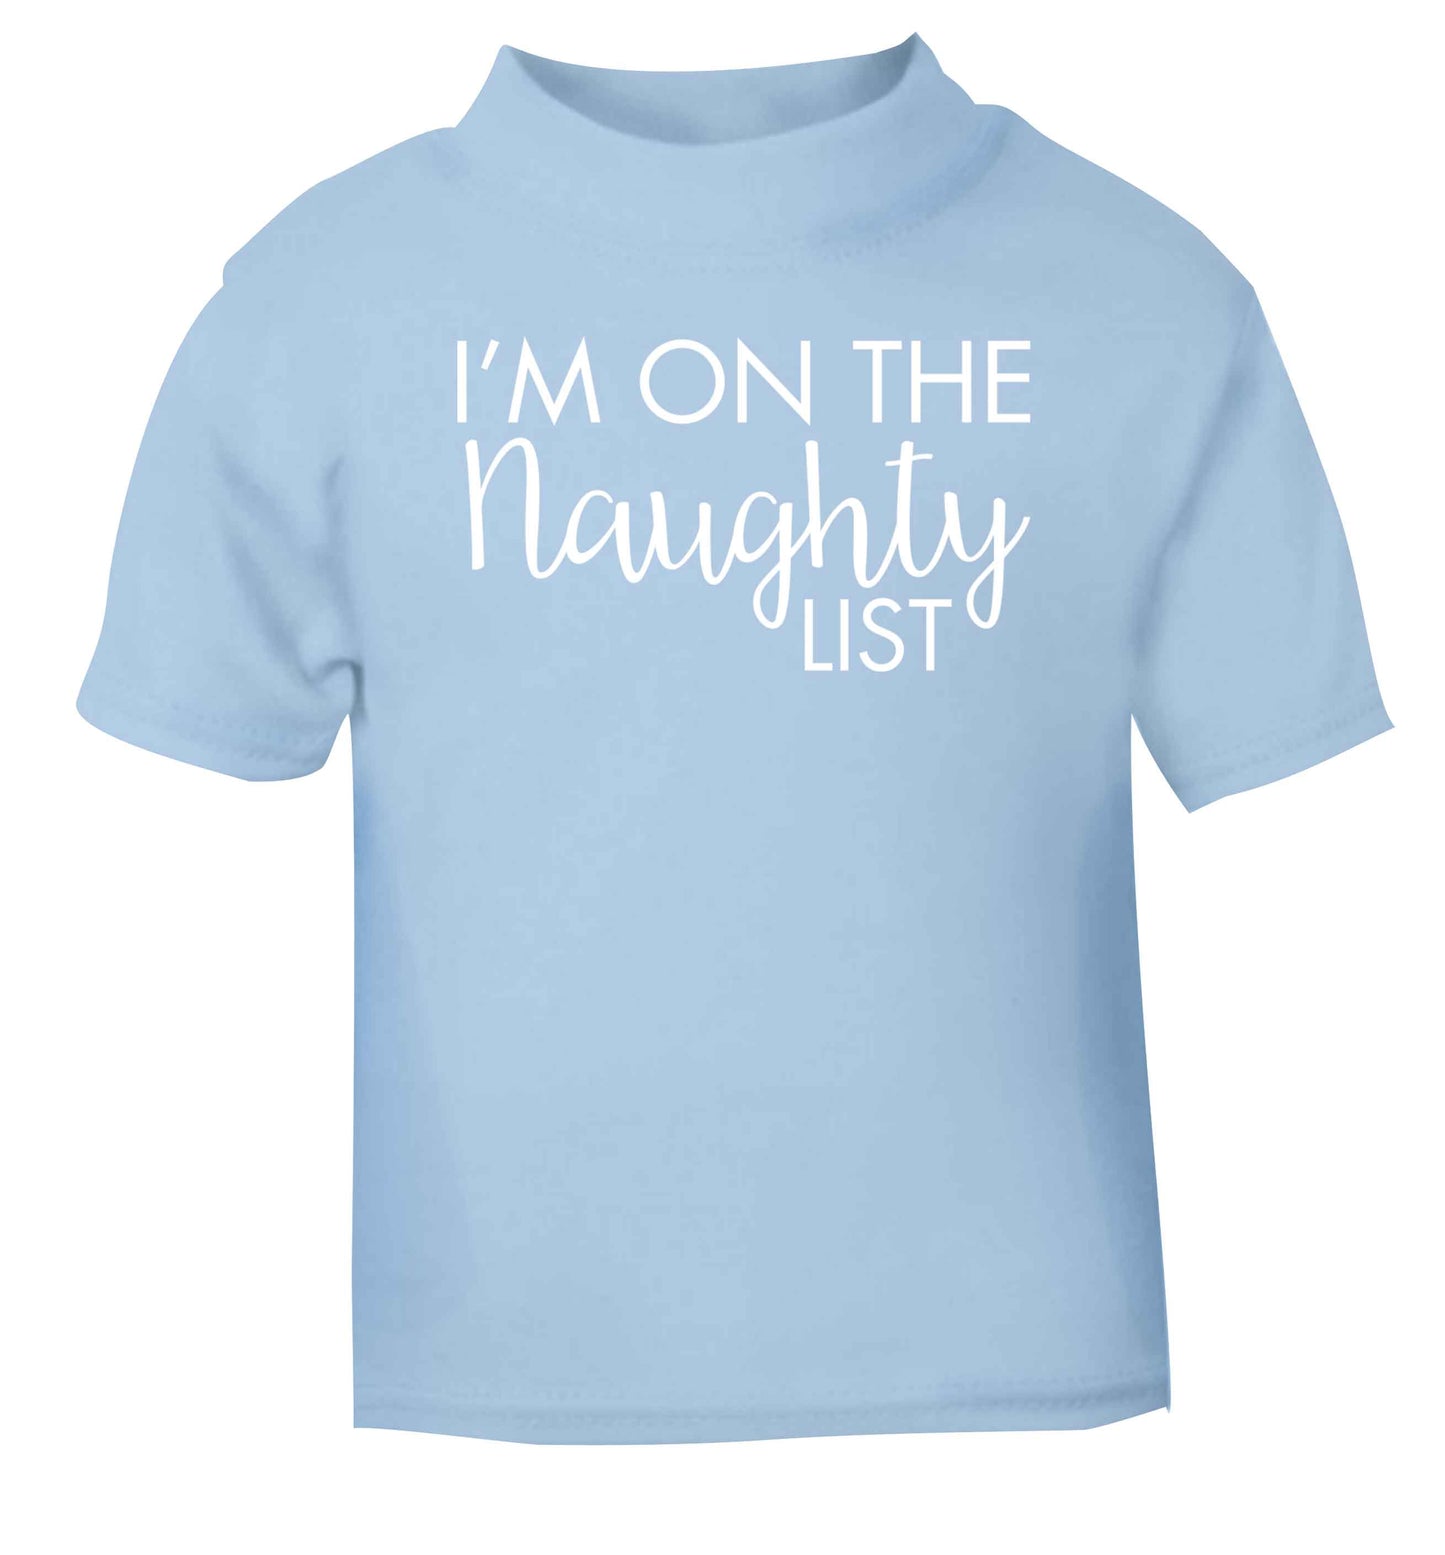 I'm on the naughty list light blue baby toddler Tshirt 2 Years